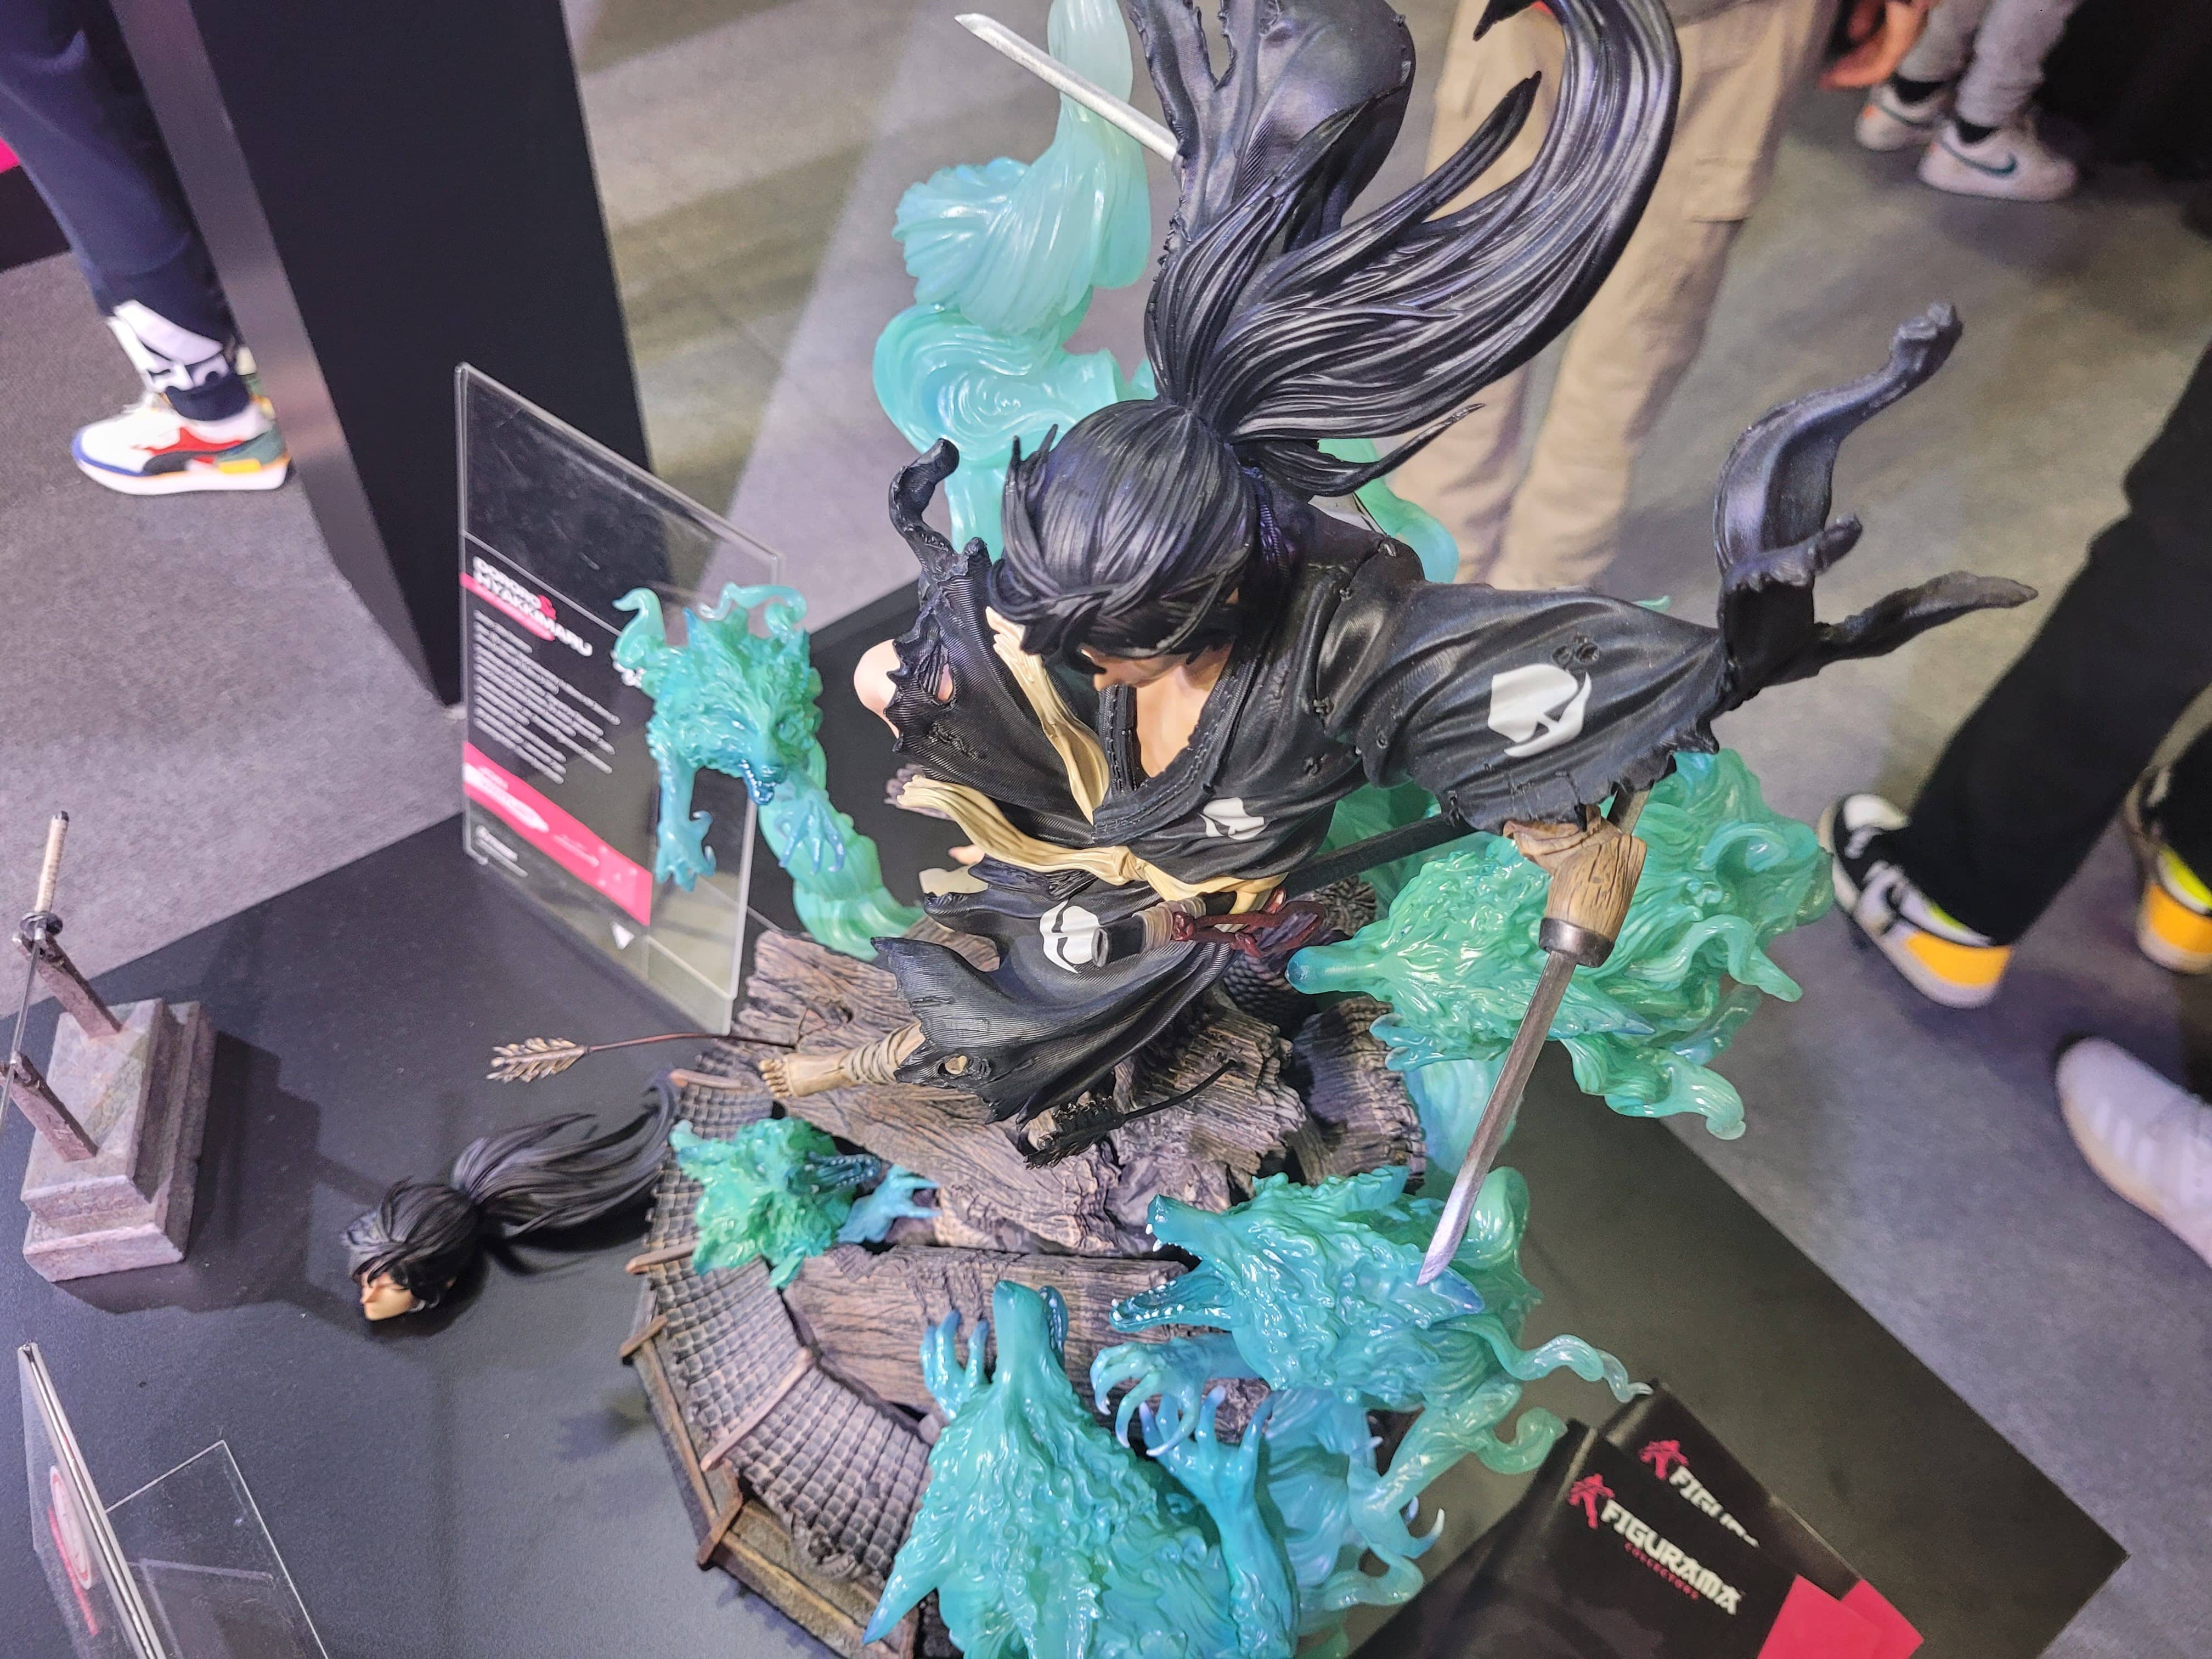 Figurama Collectors Reveal Promotional Video for the Upcoming Dororo Statue  - Anime Corner